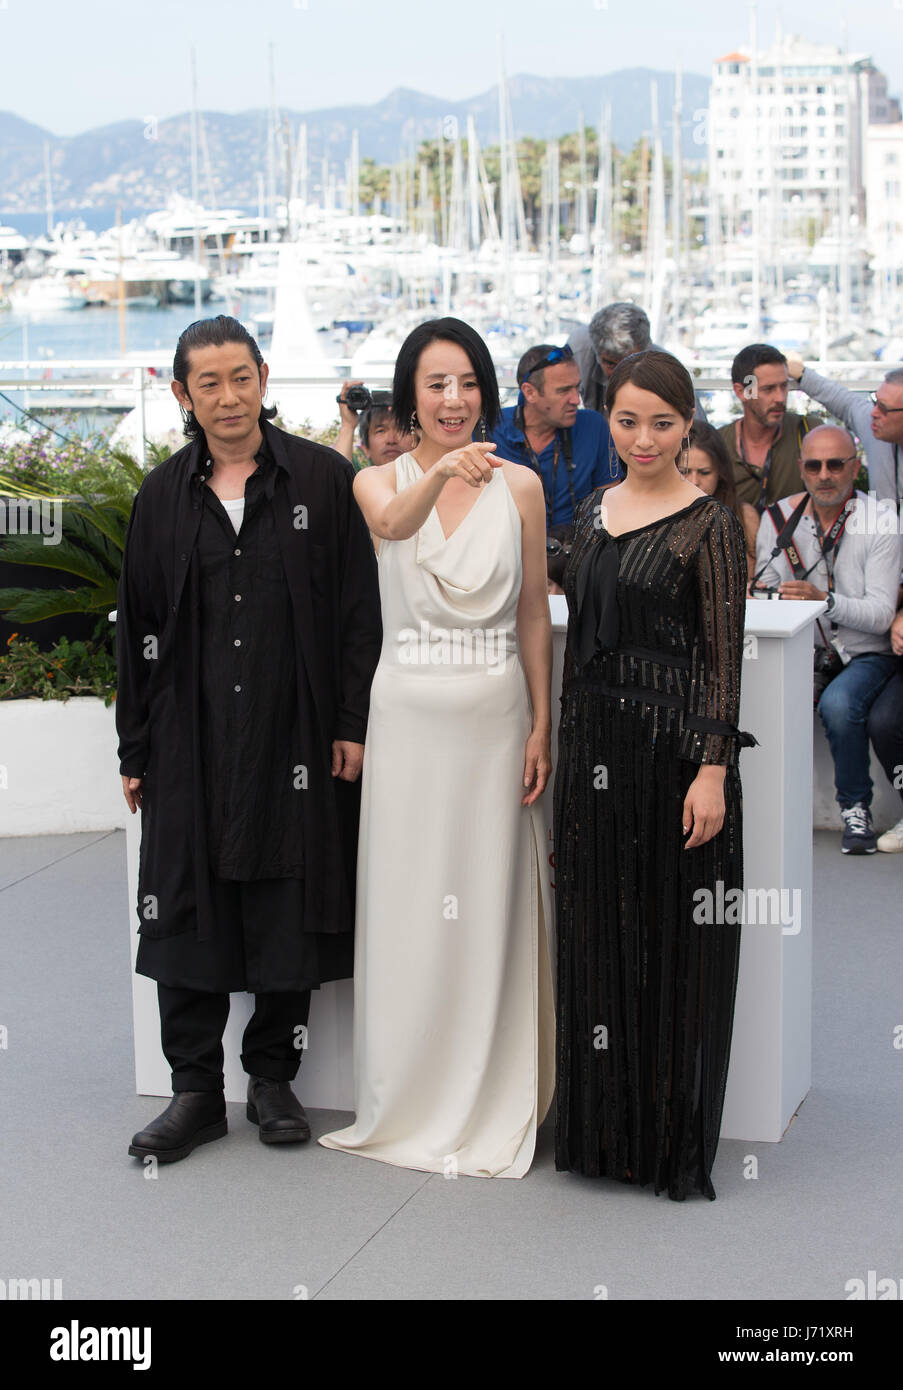 Cannes, France. 23rd May, 2017. Actor Masatoshi Nagase, actresses Misuzu Kanno and Atame Misaki (L-R) pose for a photocall of the film 'Hikari (Radiance) ' during the 70th Cannes Film Festival at Palais des Festivals in Cannes, France, on May 23, 2017. Credit: Xu Jinquan/Xinhua/Alamy Live News Stock Photo